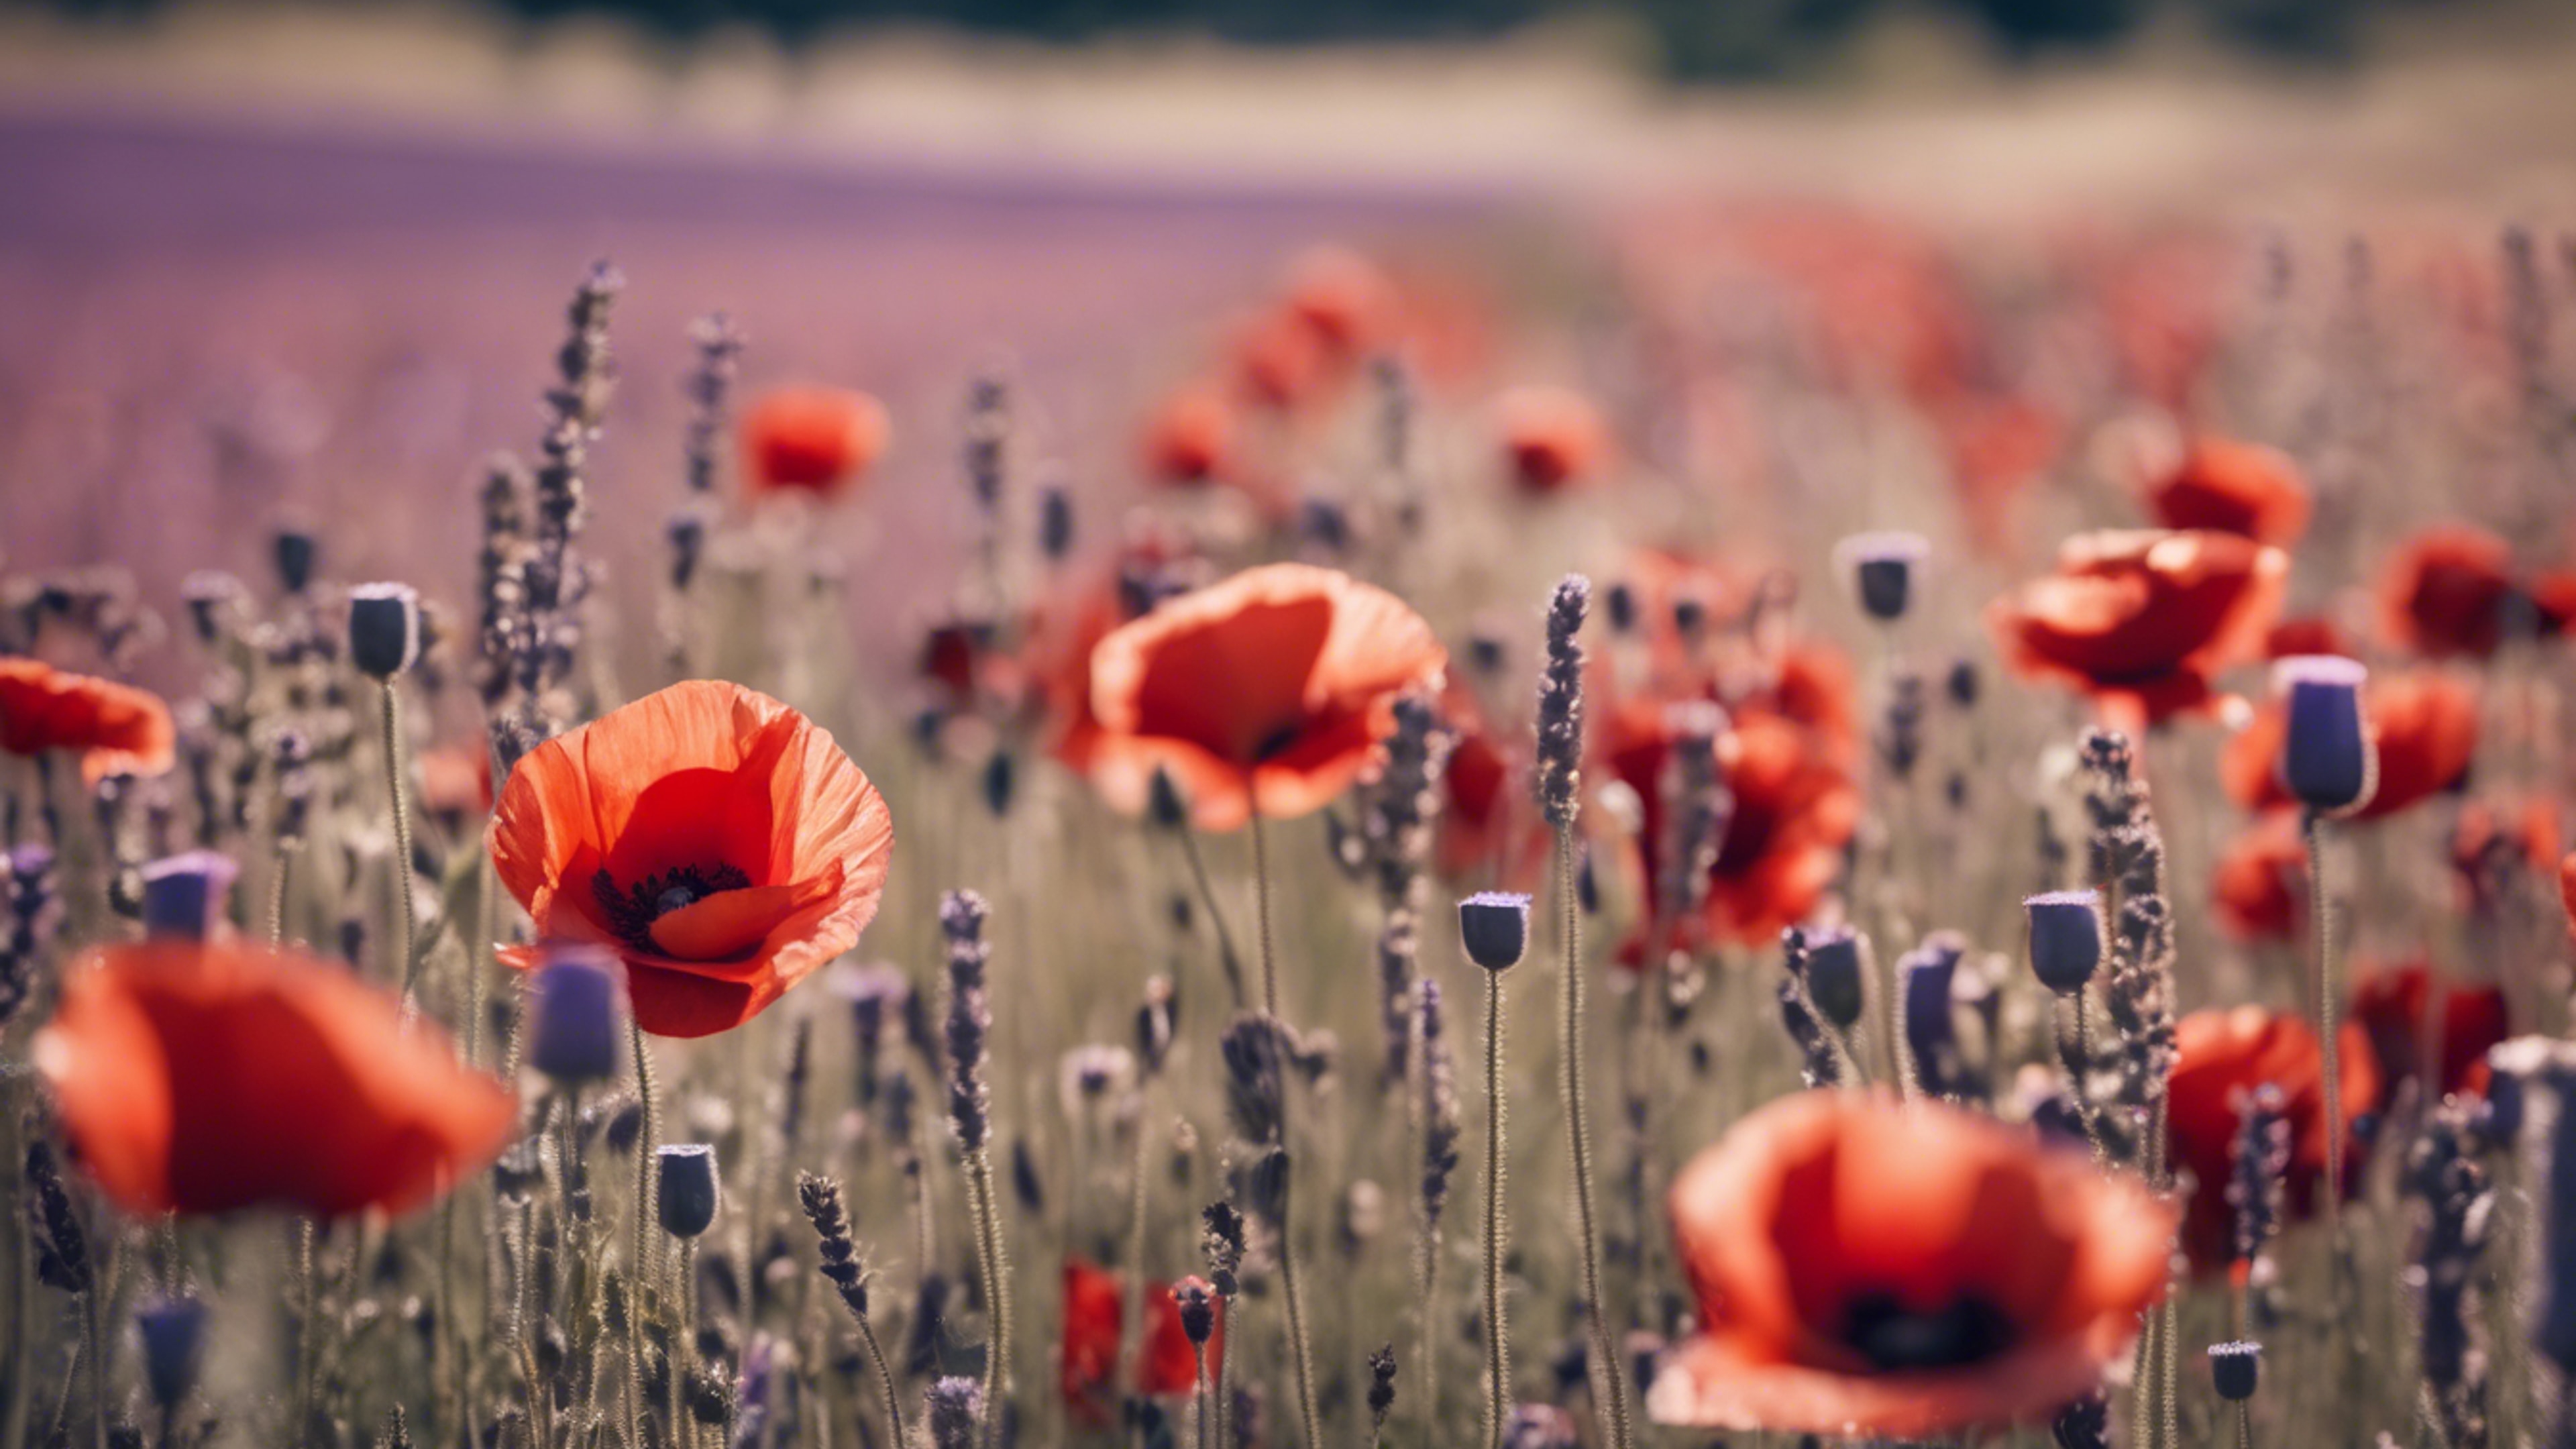 A field of red poppies naturally fading into a lavender field. Валлпапер[76e938c2507742cfb107]